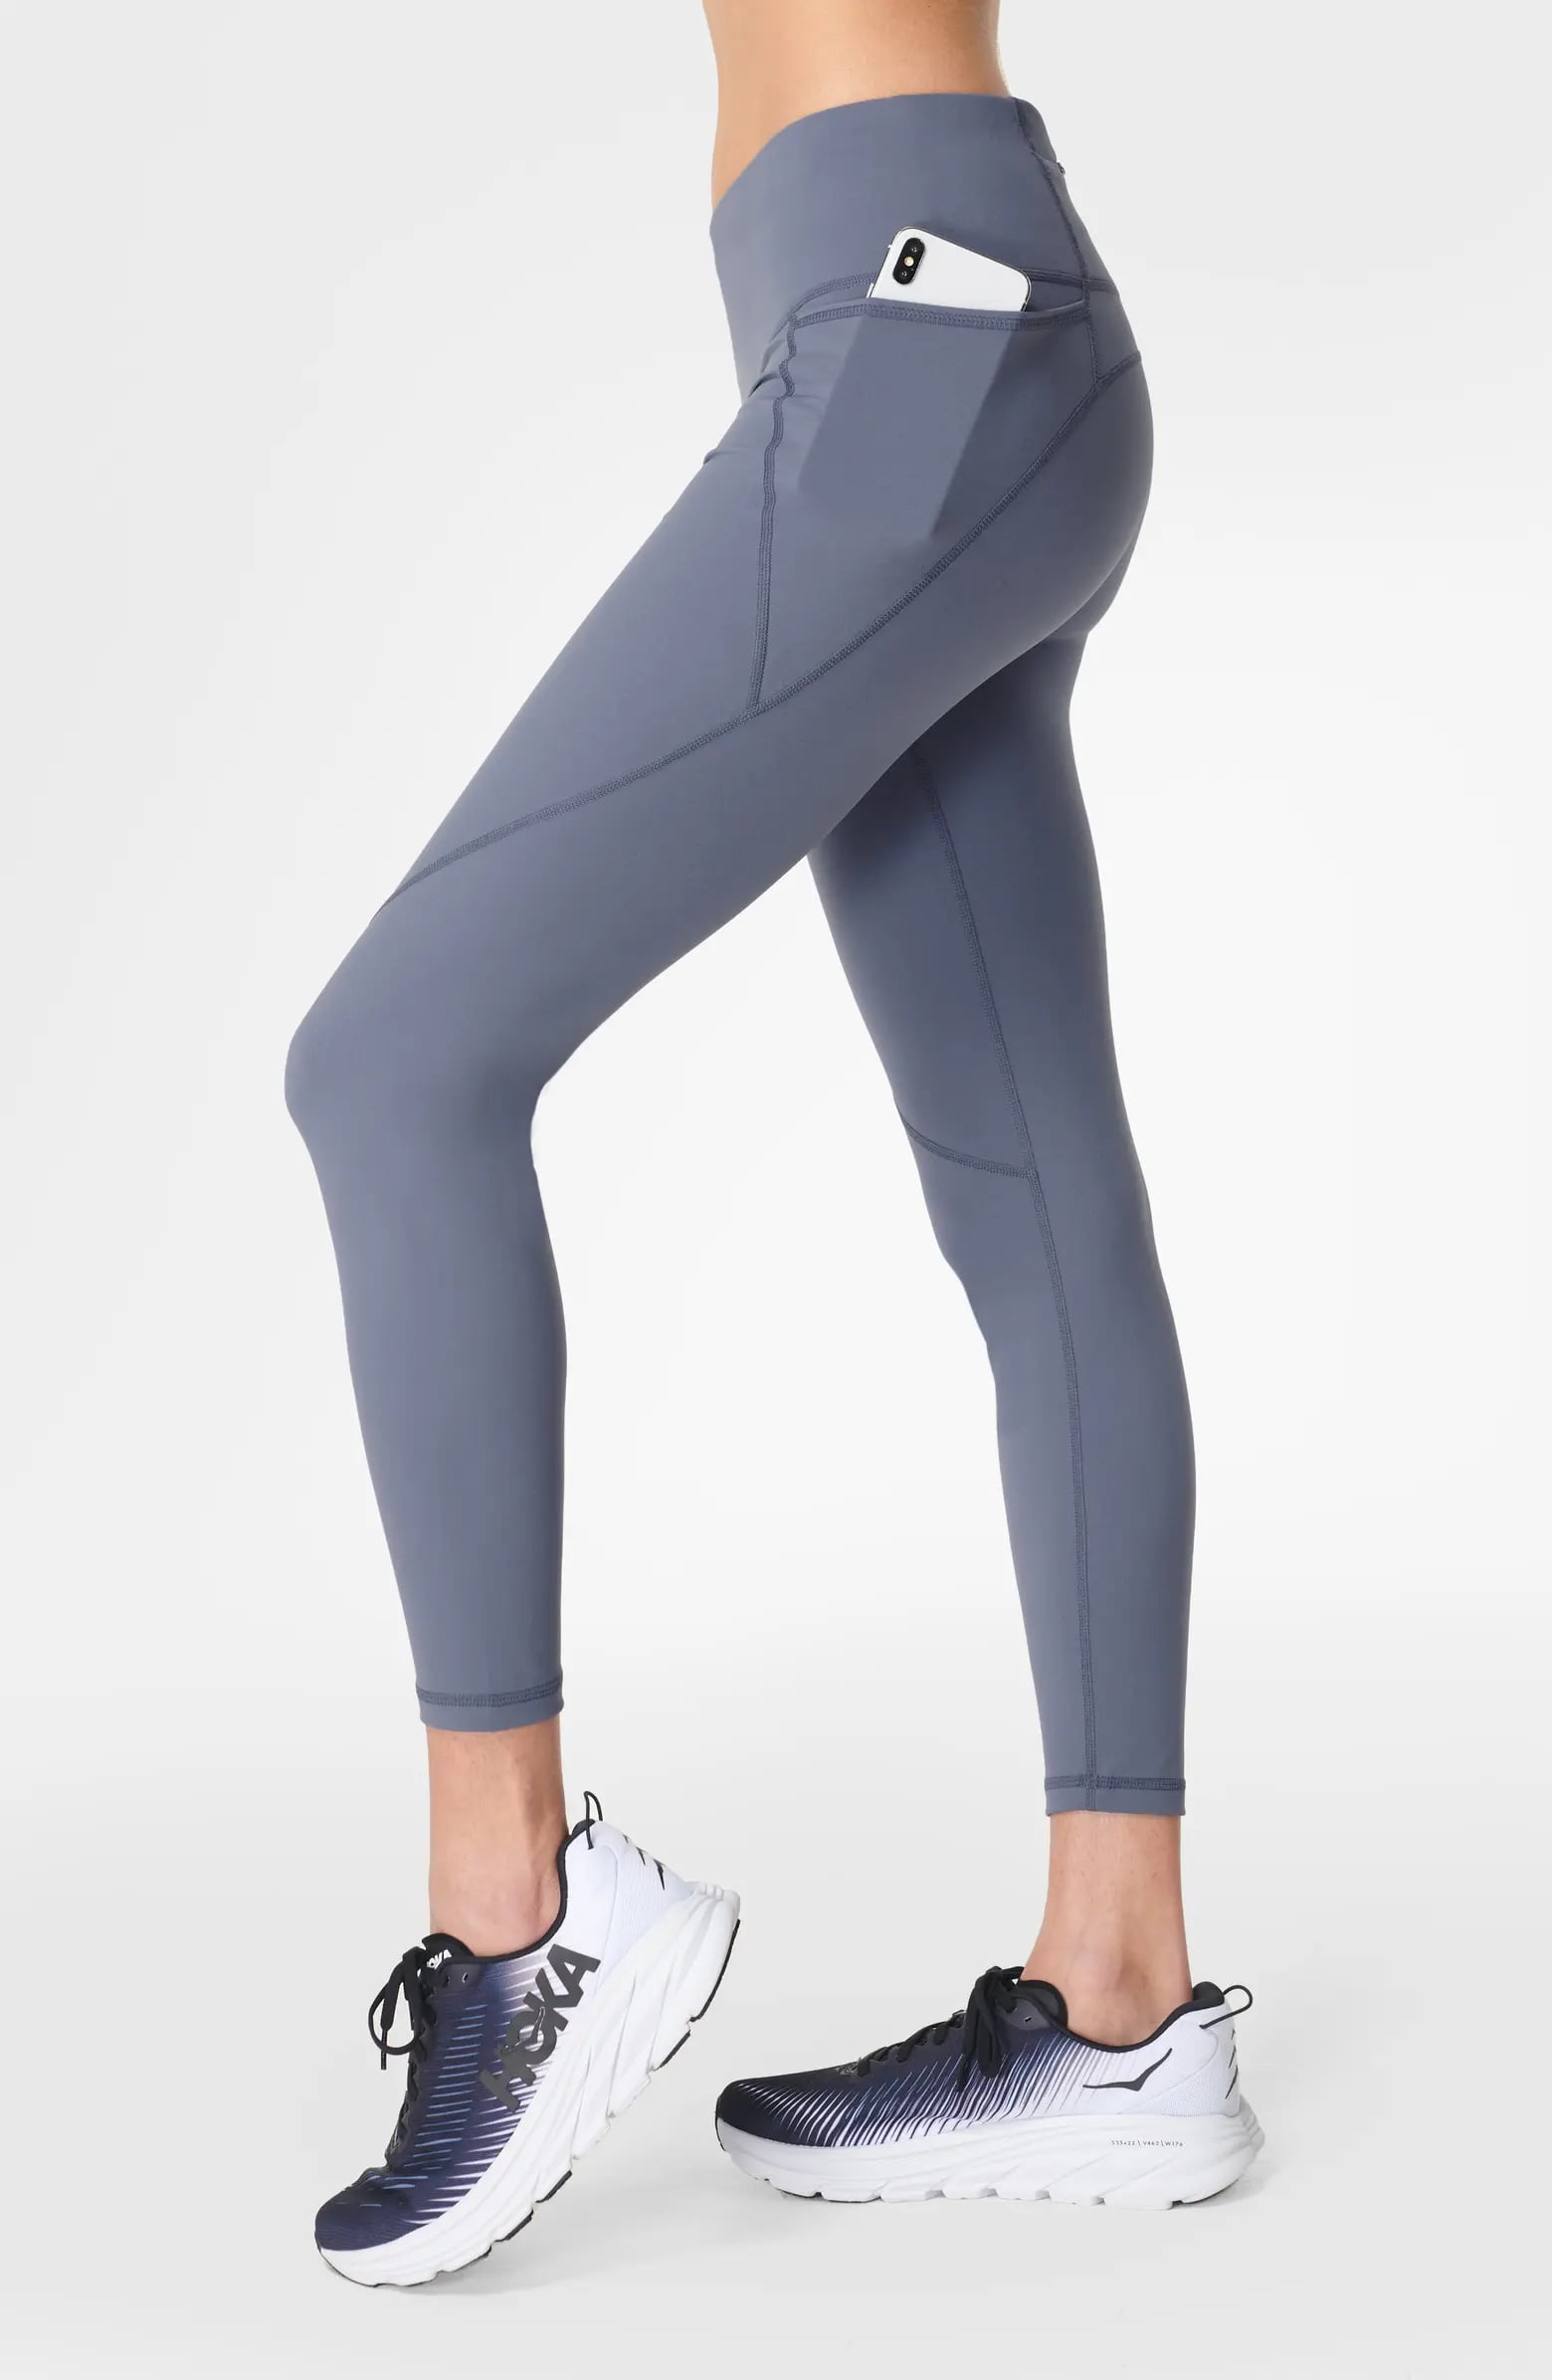 Leggings: Sweaty Betty Power Pocket Workout 7/8 Leggings, 32 Workout  Clothing Deals Worth Shopping From the Nordstrom Anniversary Sale